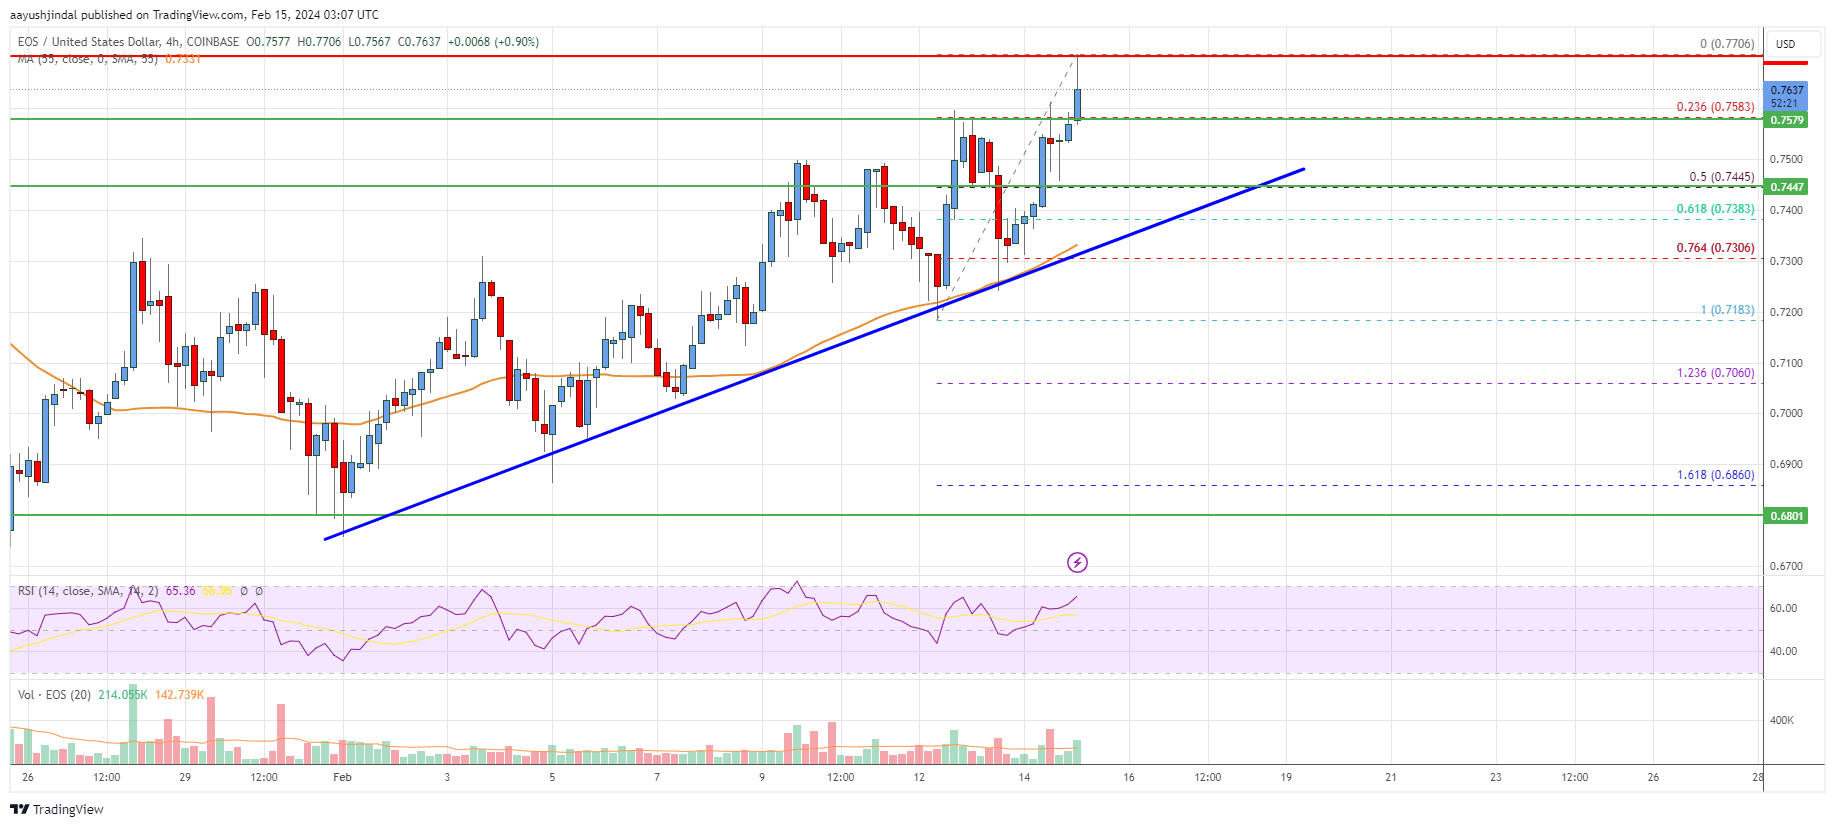 EOS Price Analysis: Bulls Aim For Sustained Move To $0.90